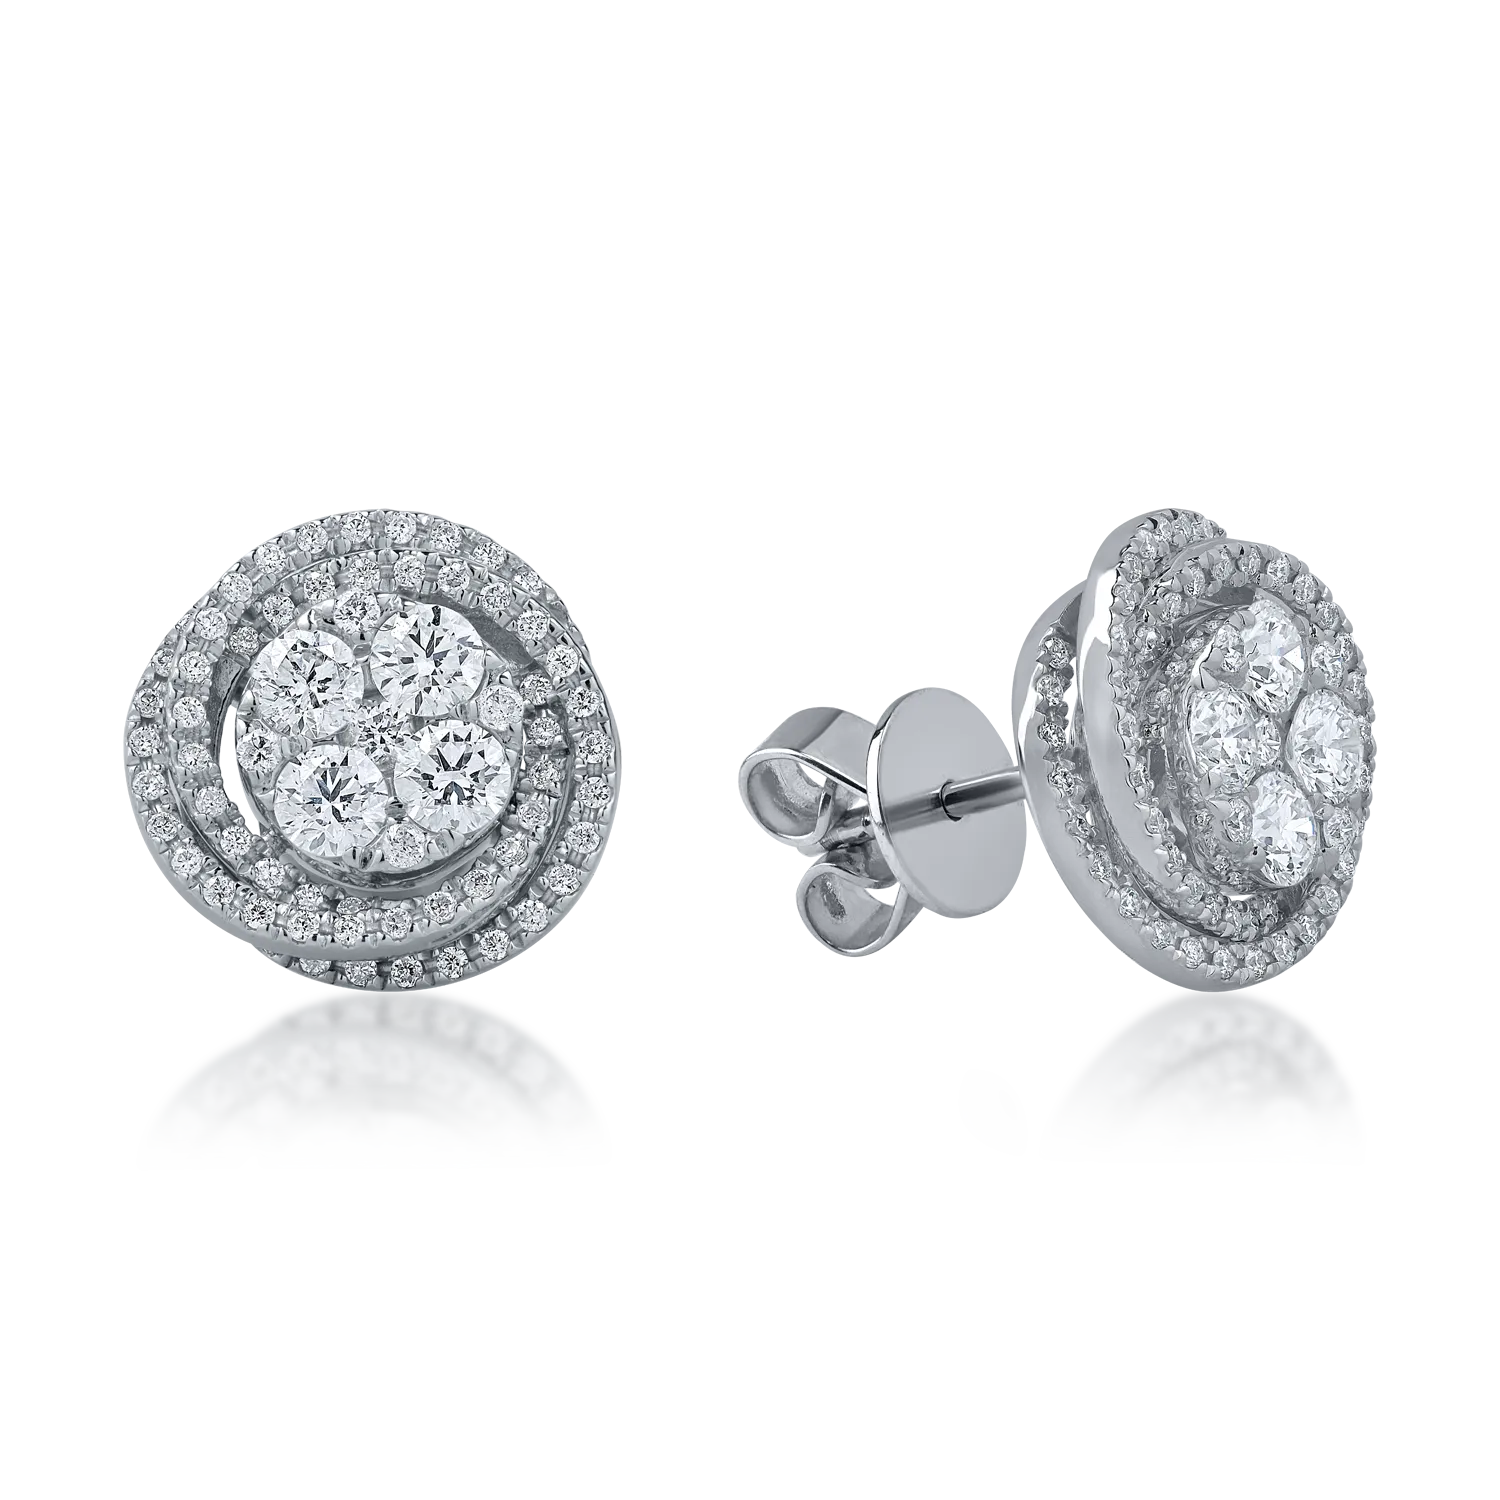 White gold round earrings with 1.16ct diamonds